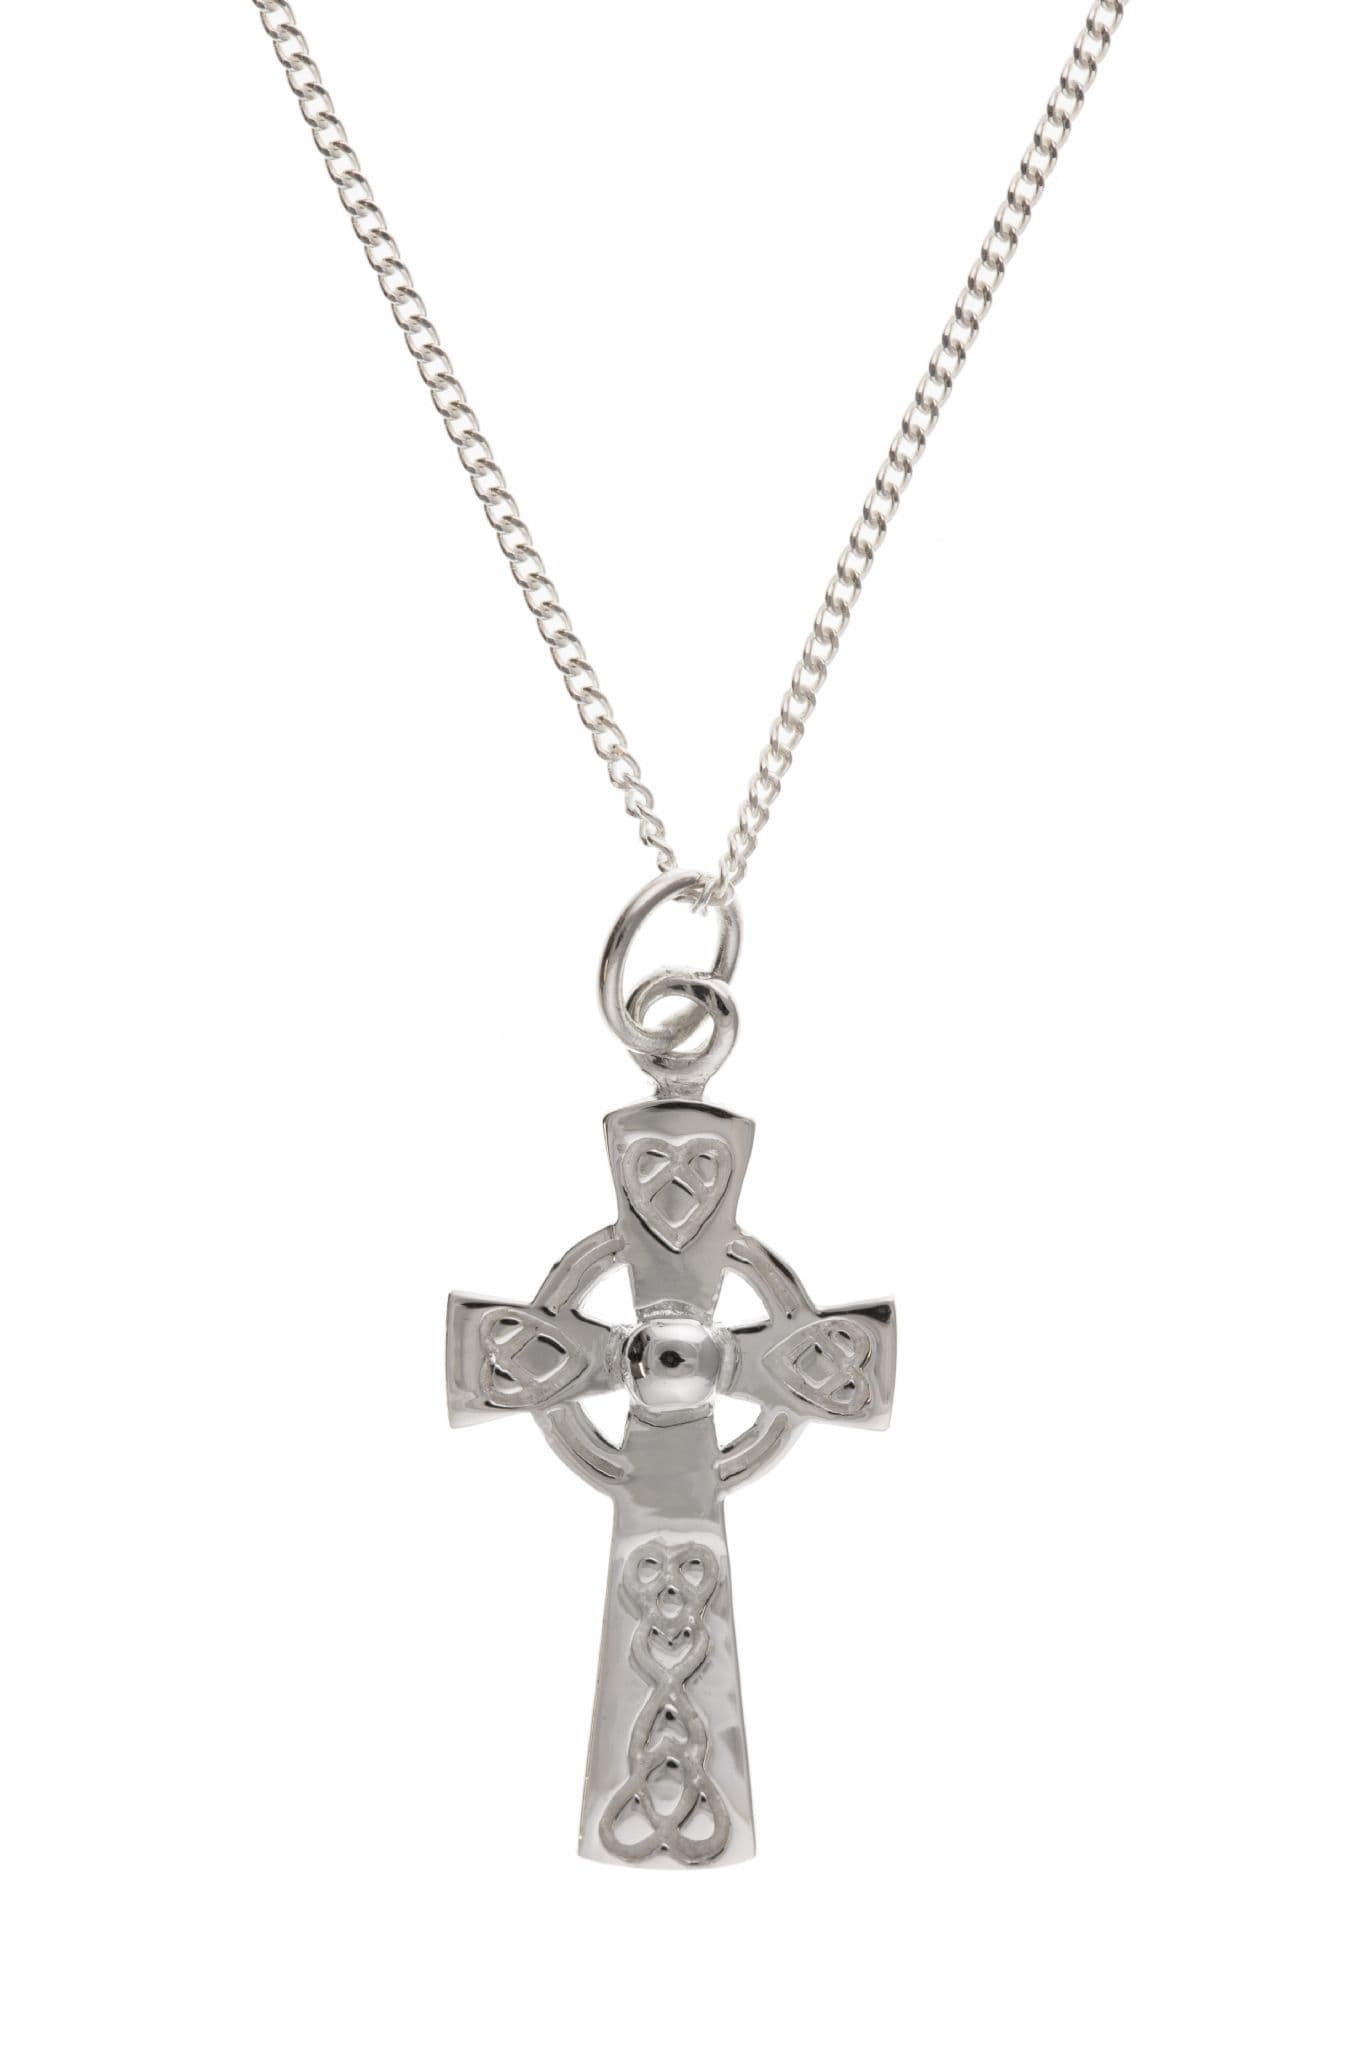 Small Patterned Sterling Silver Celtic Cross Including Chain